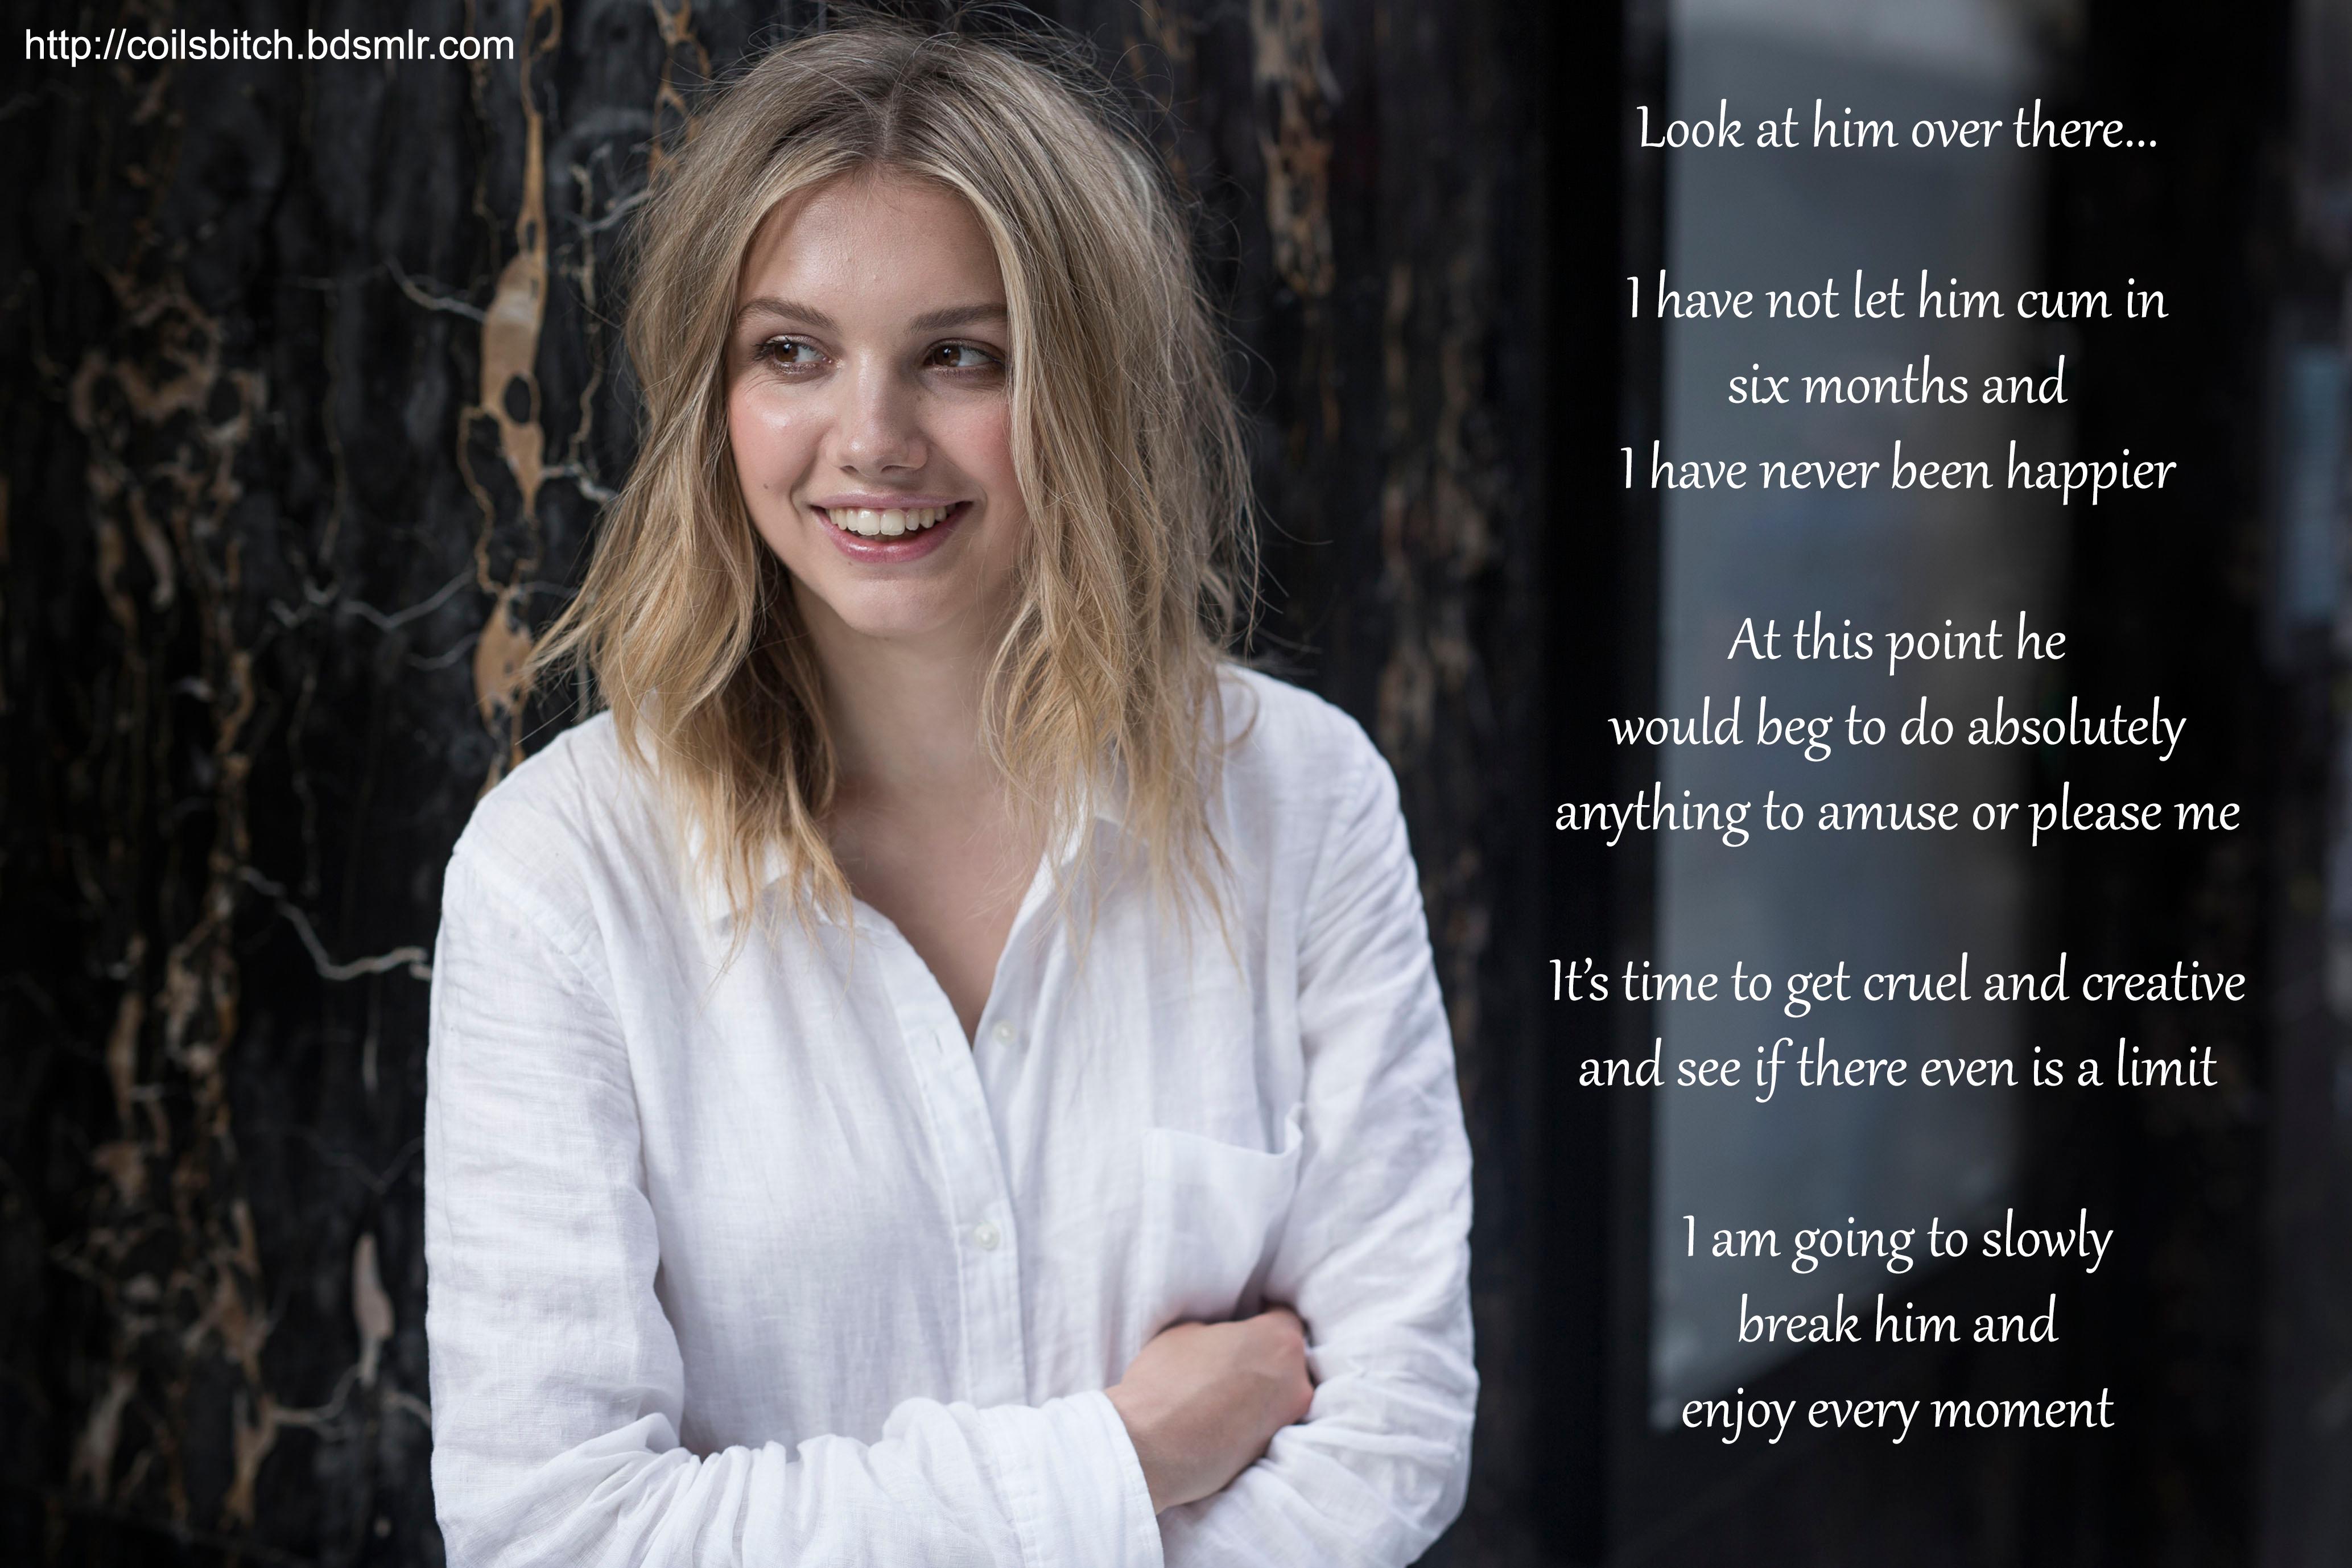 I am going to break him and enjoy every moment - Hannah Murray #0001 ...